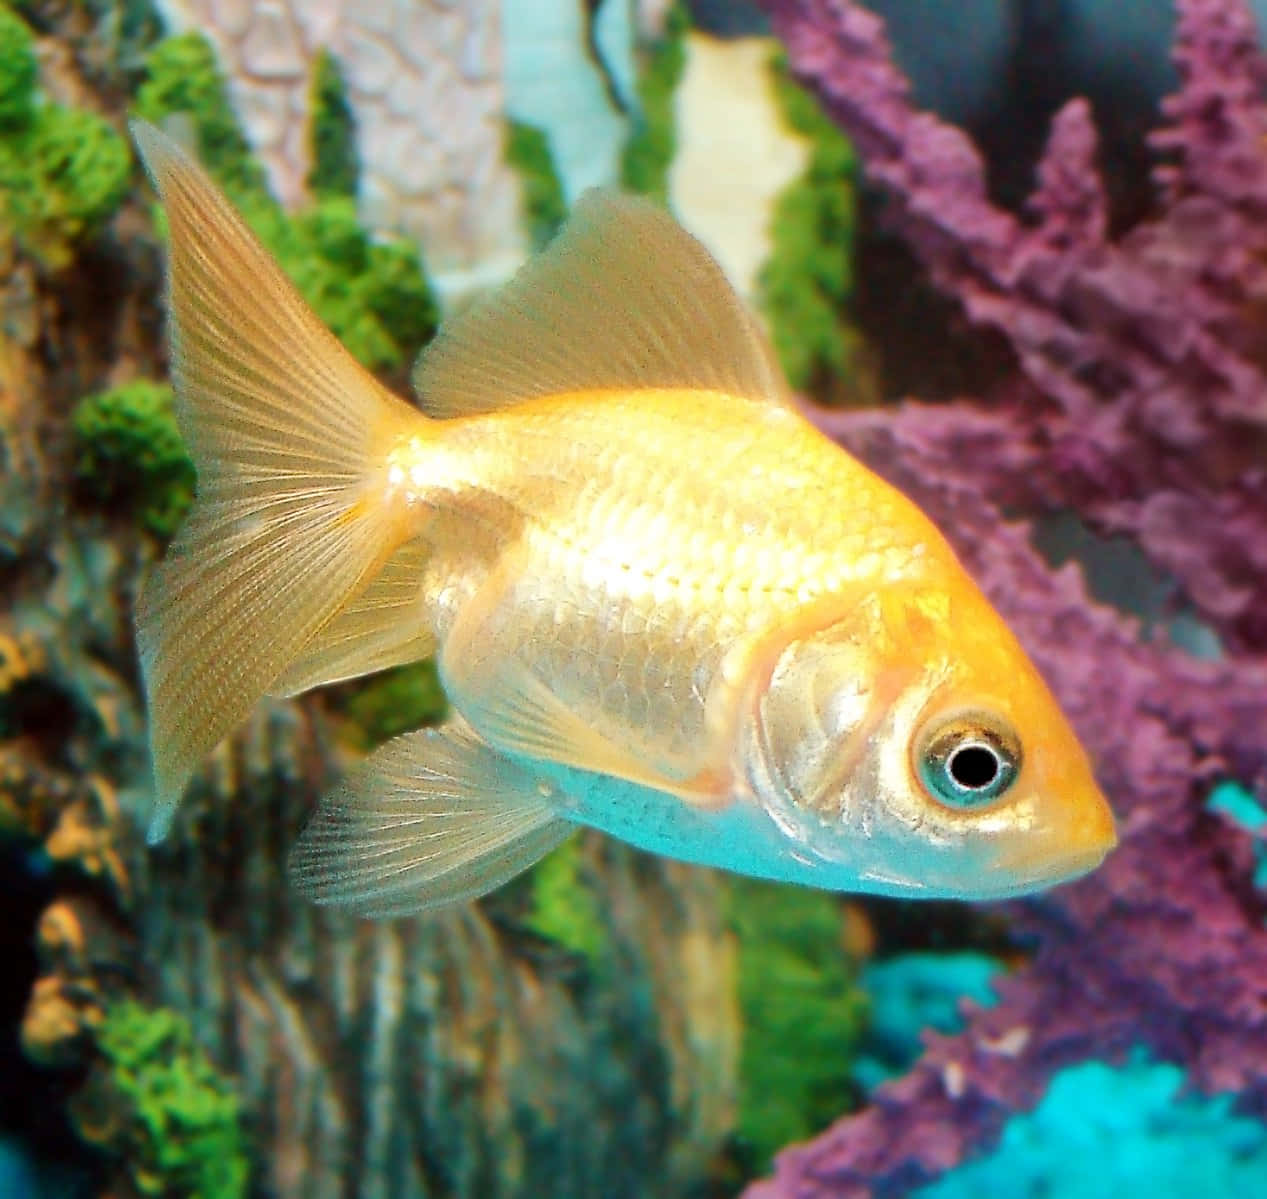 A close-up view of a shiny goldfish